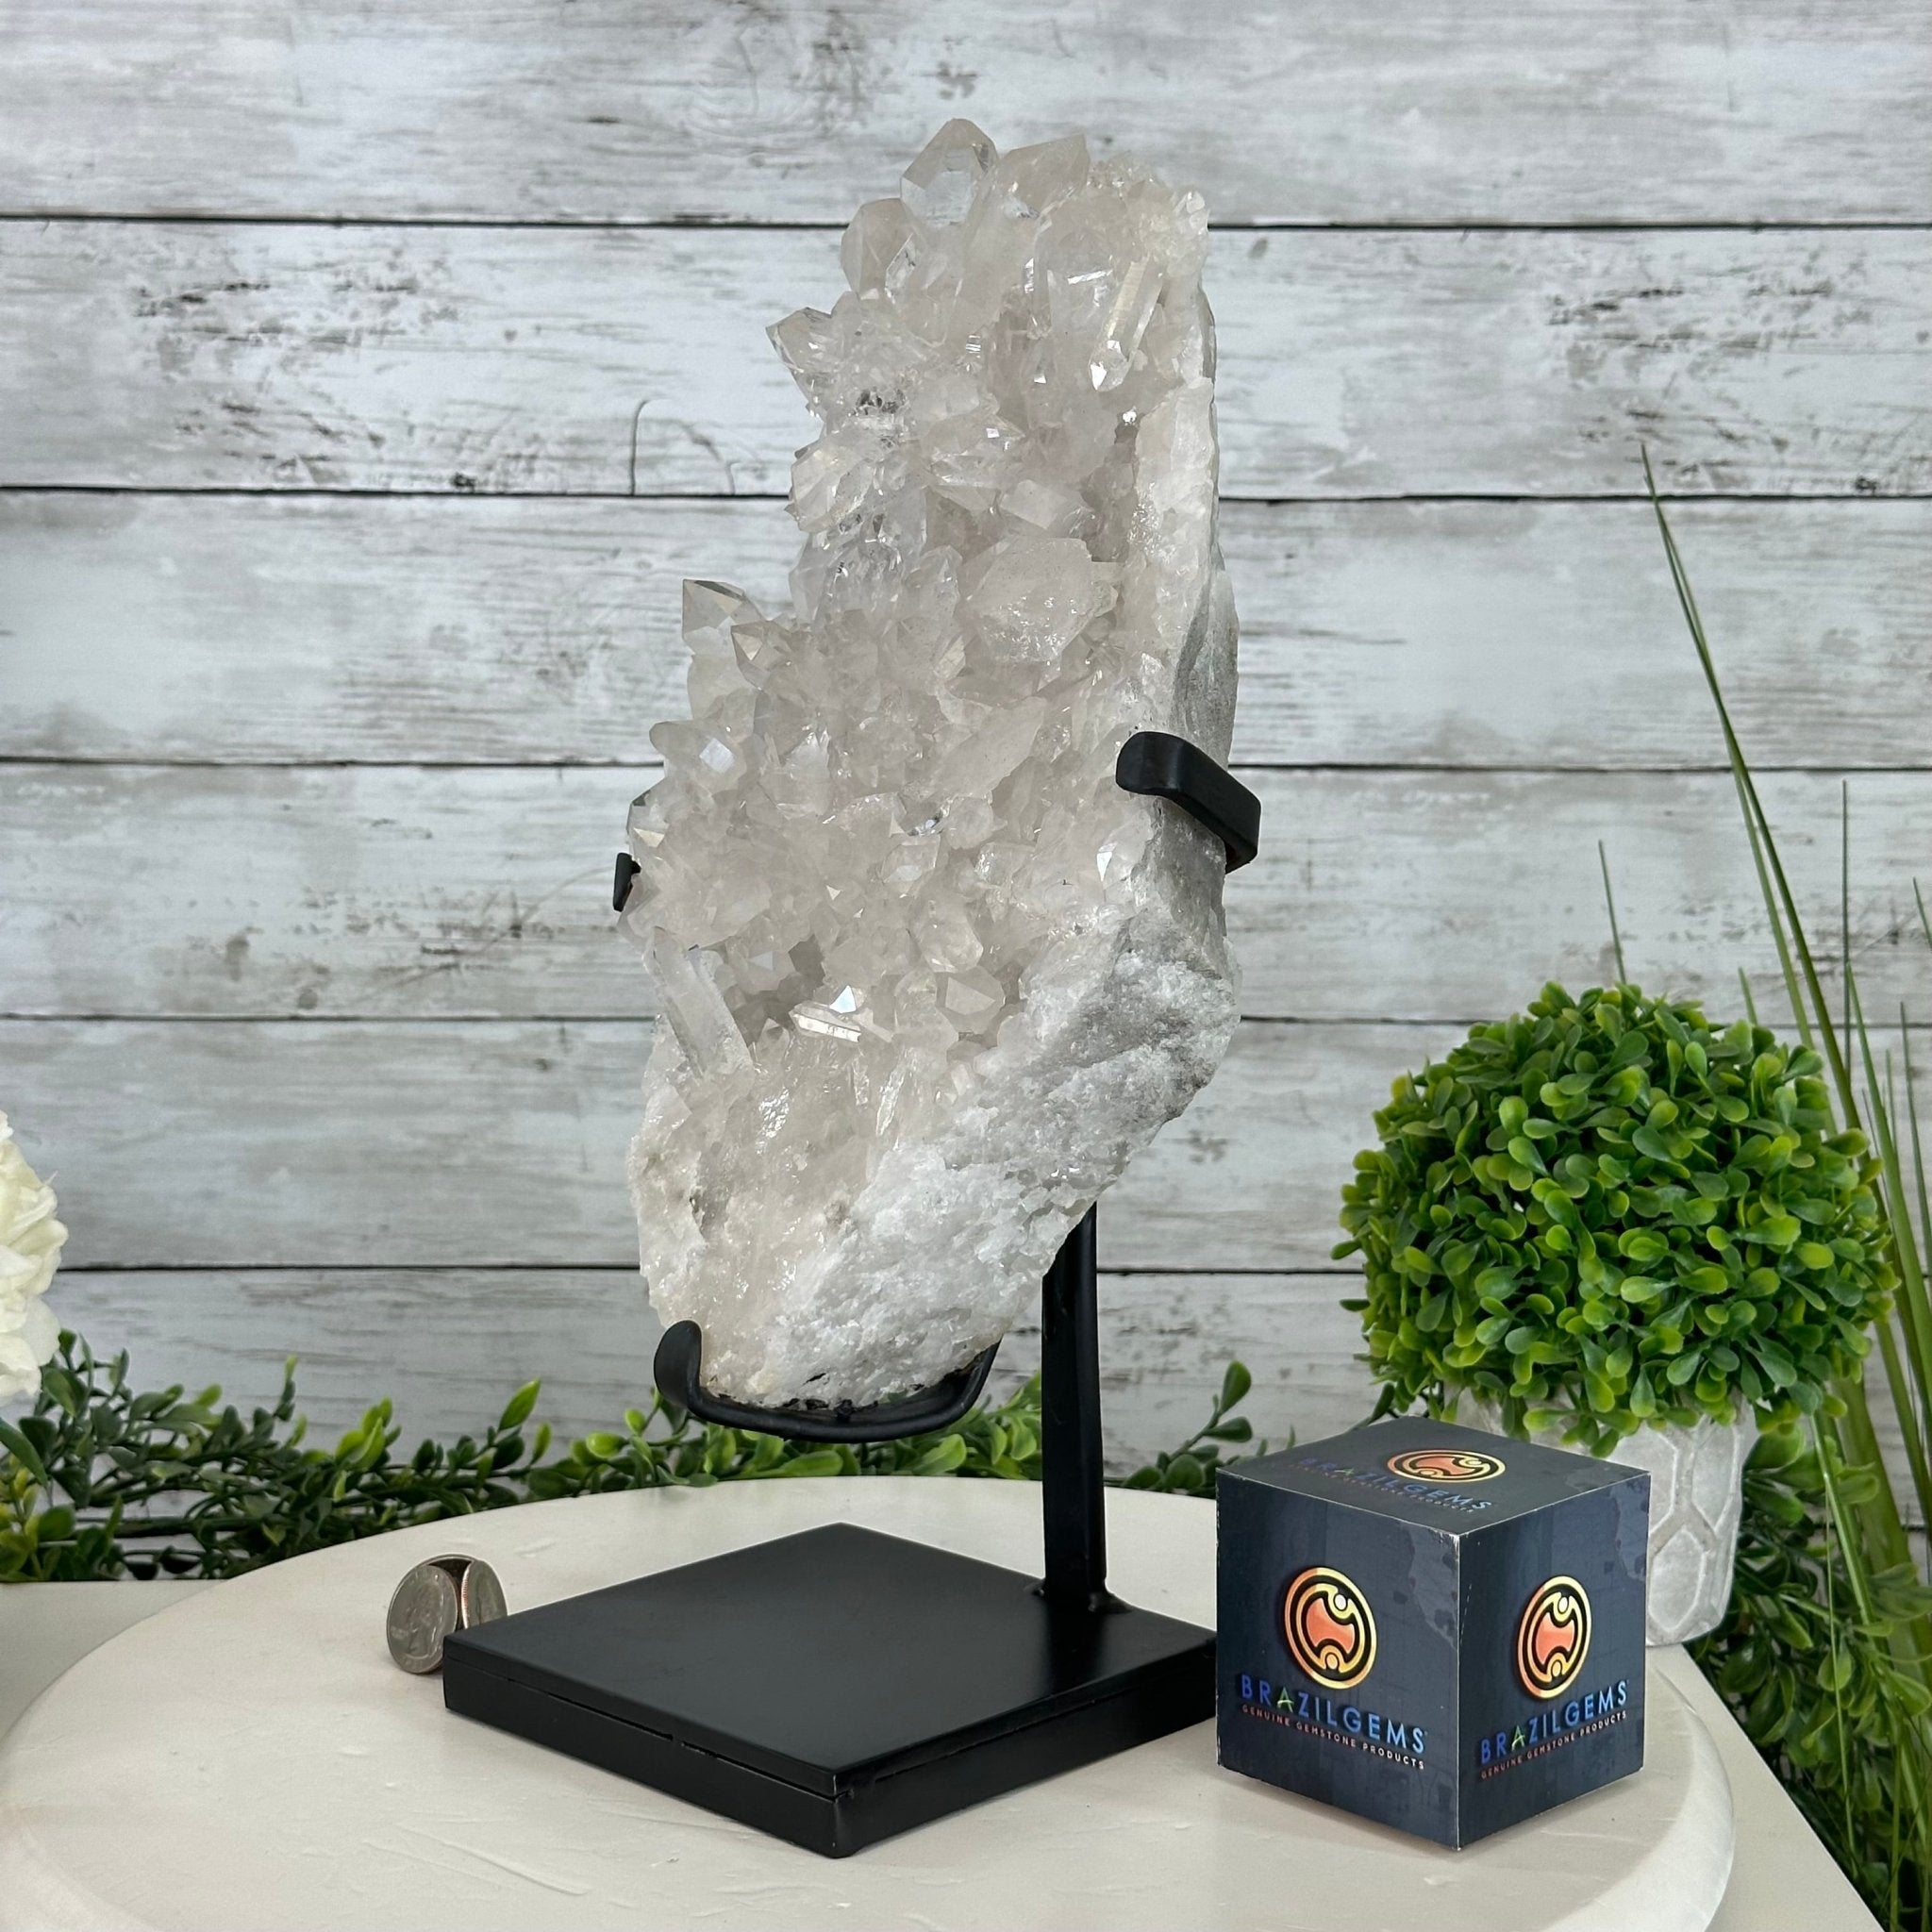 Super Quality Brazilian Clear Quartz Crystal Cluster, metal base, 10.1 lbs & 13.7" Tall #5495-0076 by Brazil Gems® - Brazil GemsBrazil GemsSuper Quality Brazilian Clear Quartz Crystal Cluster, metal base, 10.1 lbs & 13.7" Tall #5495-0076 by Brazil Gems®Clusters on Fixed Bases5495-0076